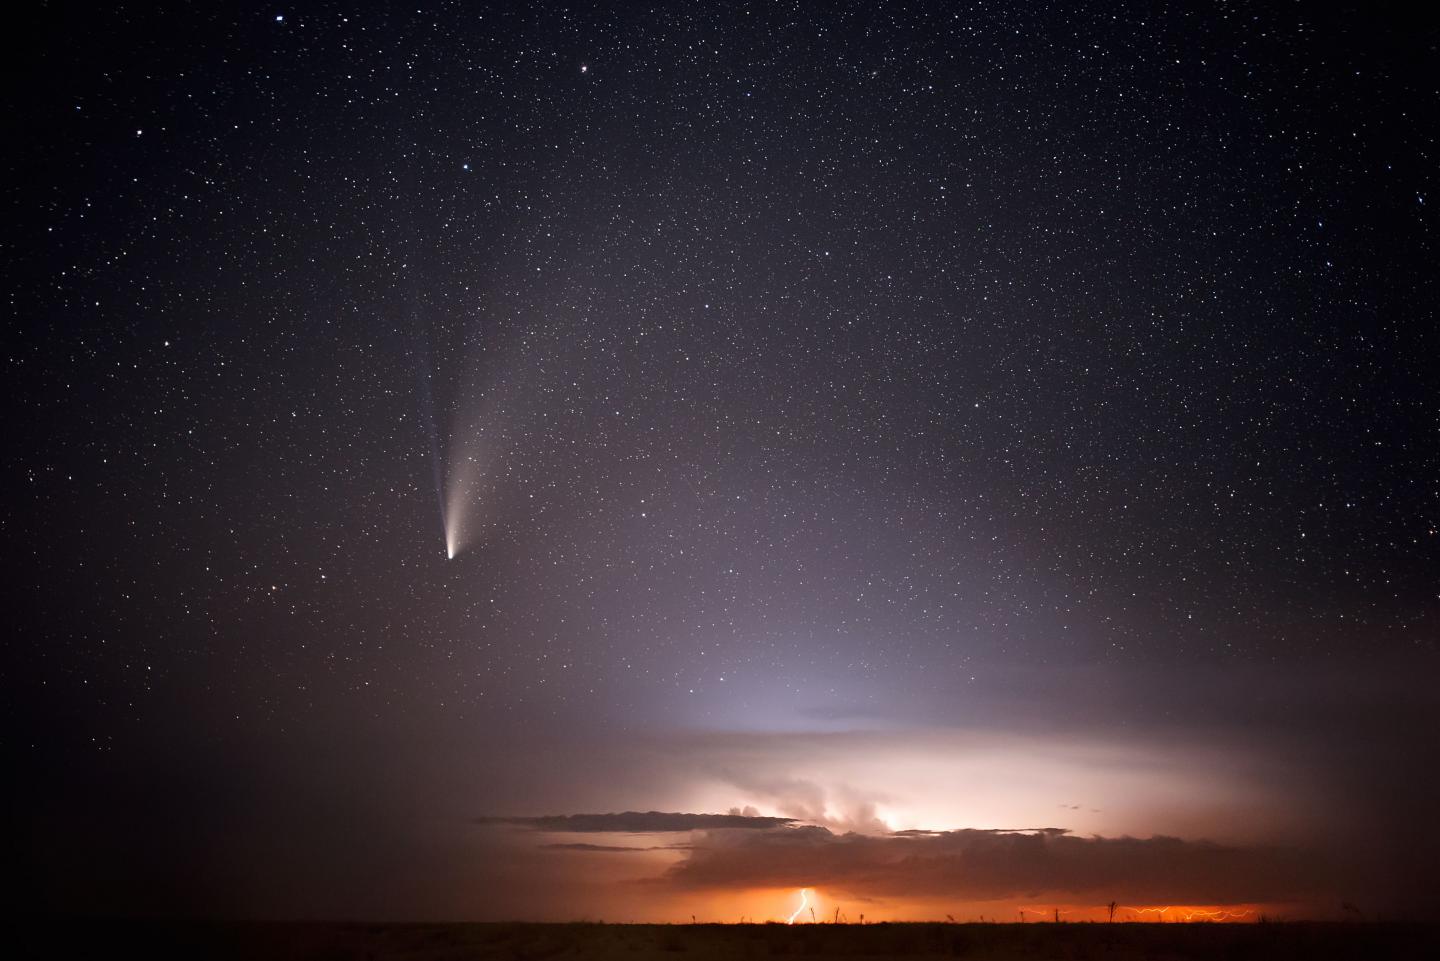 Image of a comet getting close to earth during a thunderstorm